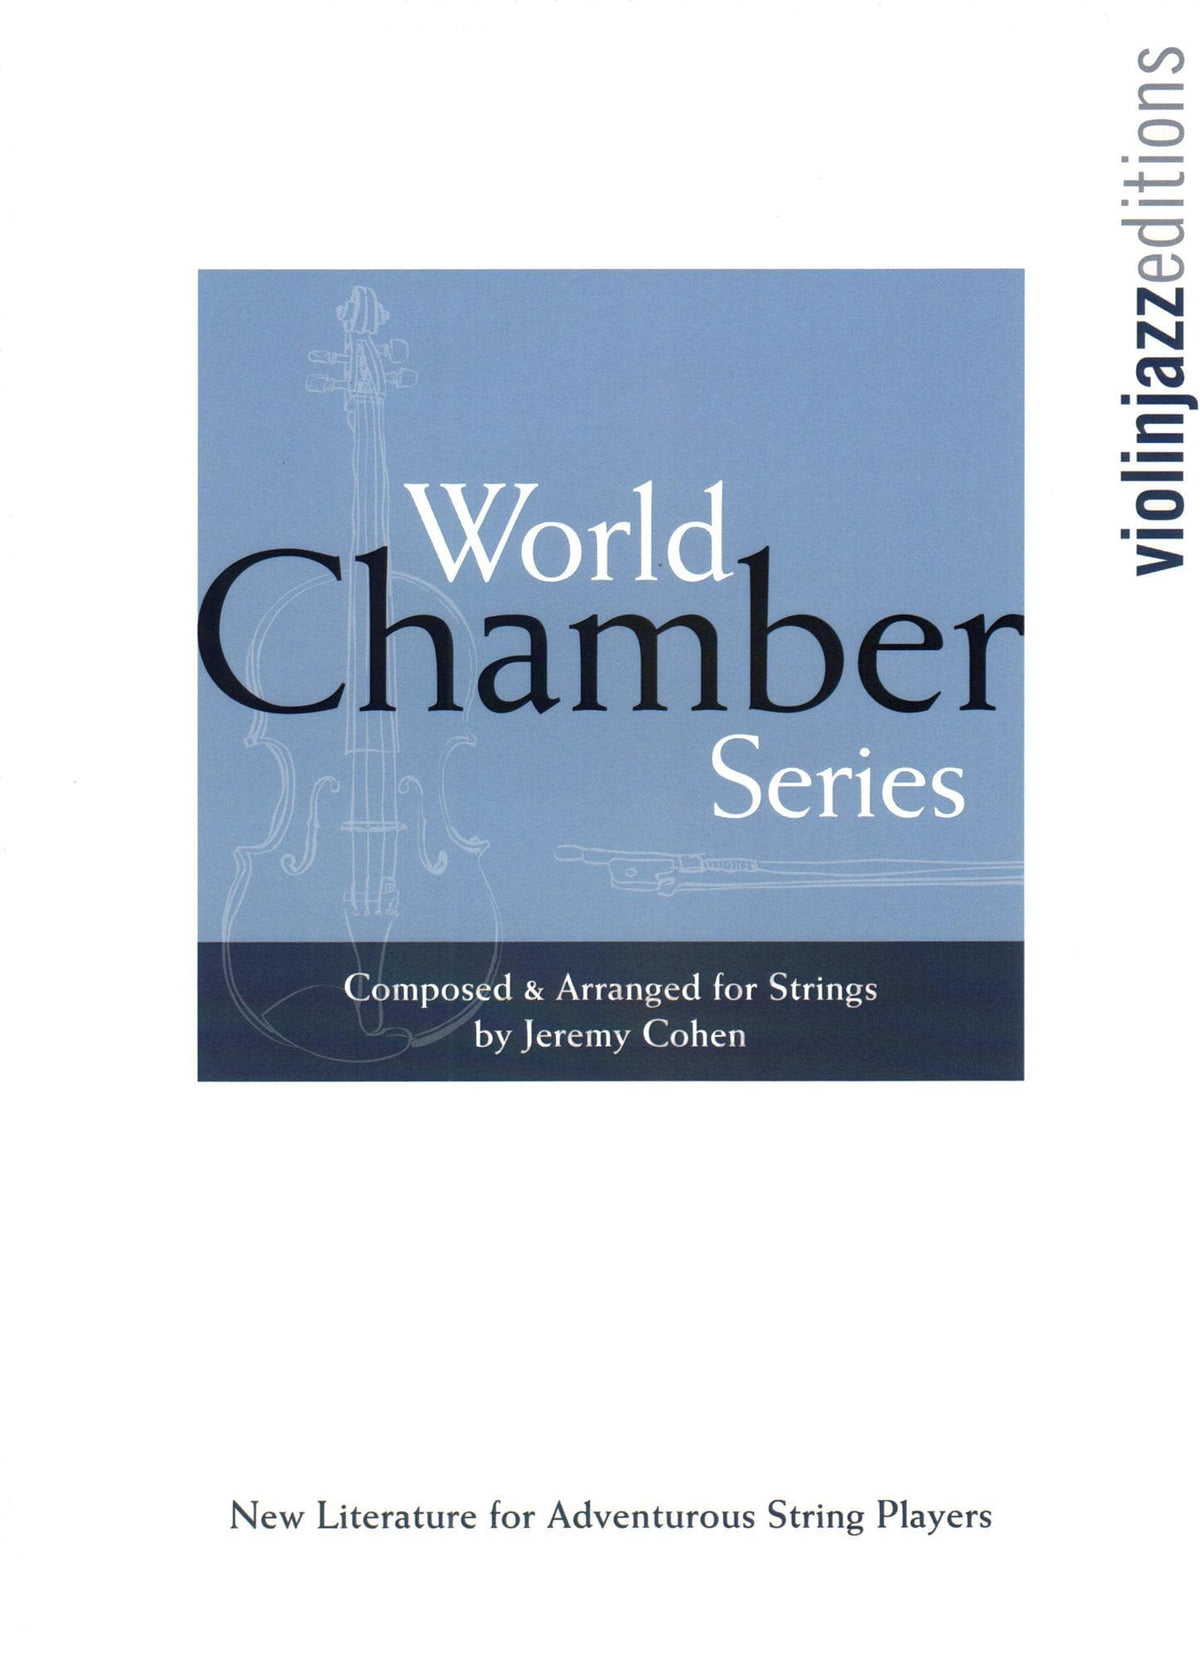 Cohen, Jeremy - Tango Toscana - World Chamber Series - for String Quintet - Violinjazz Editions